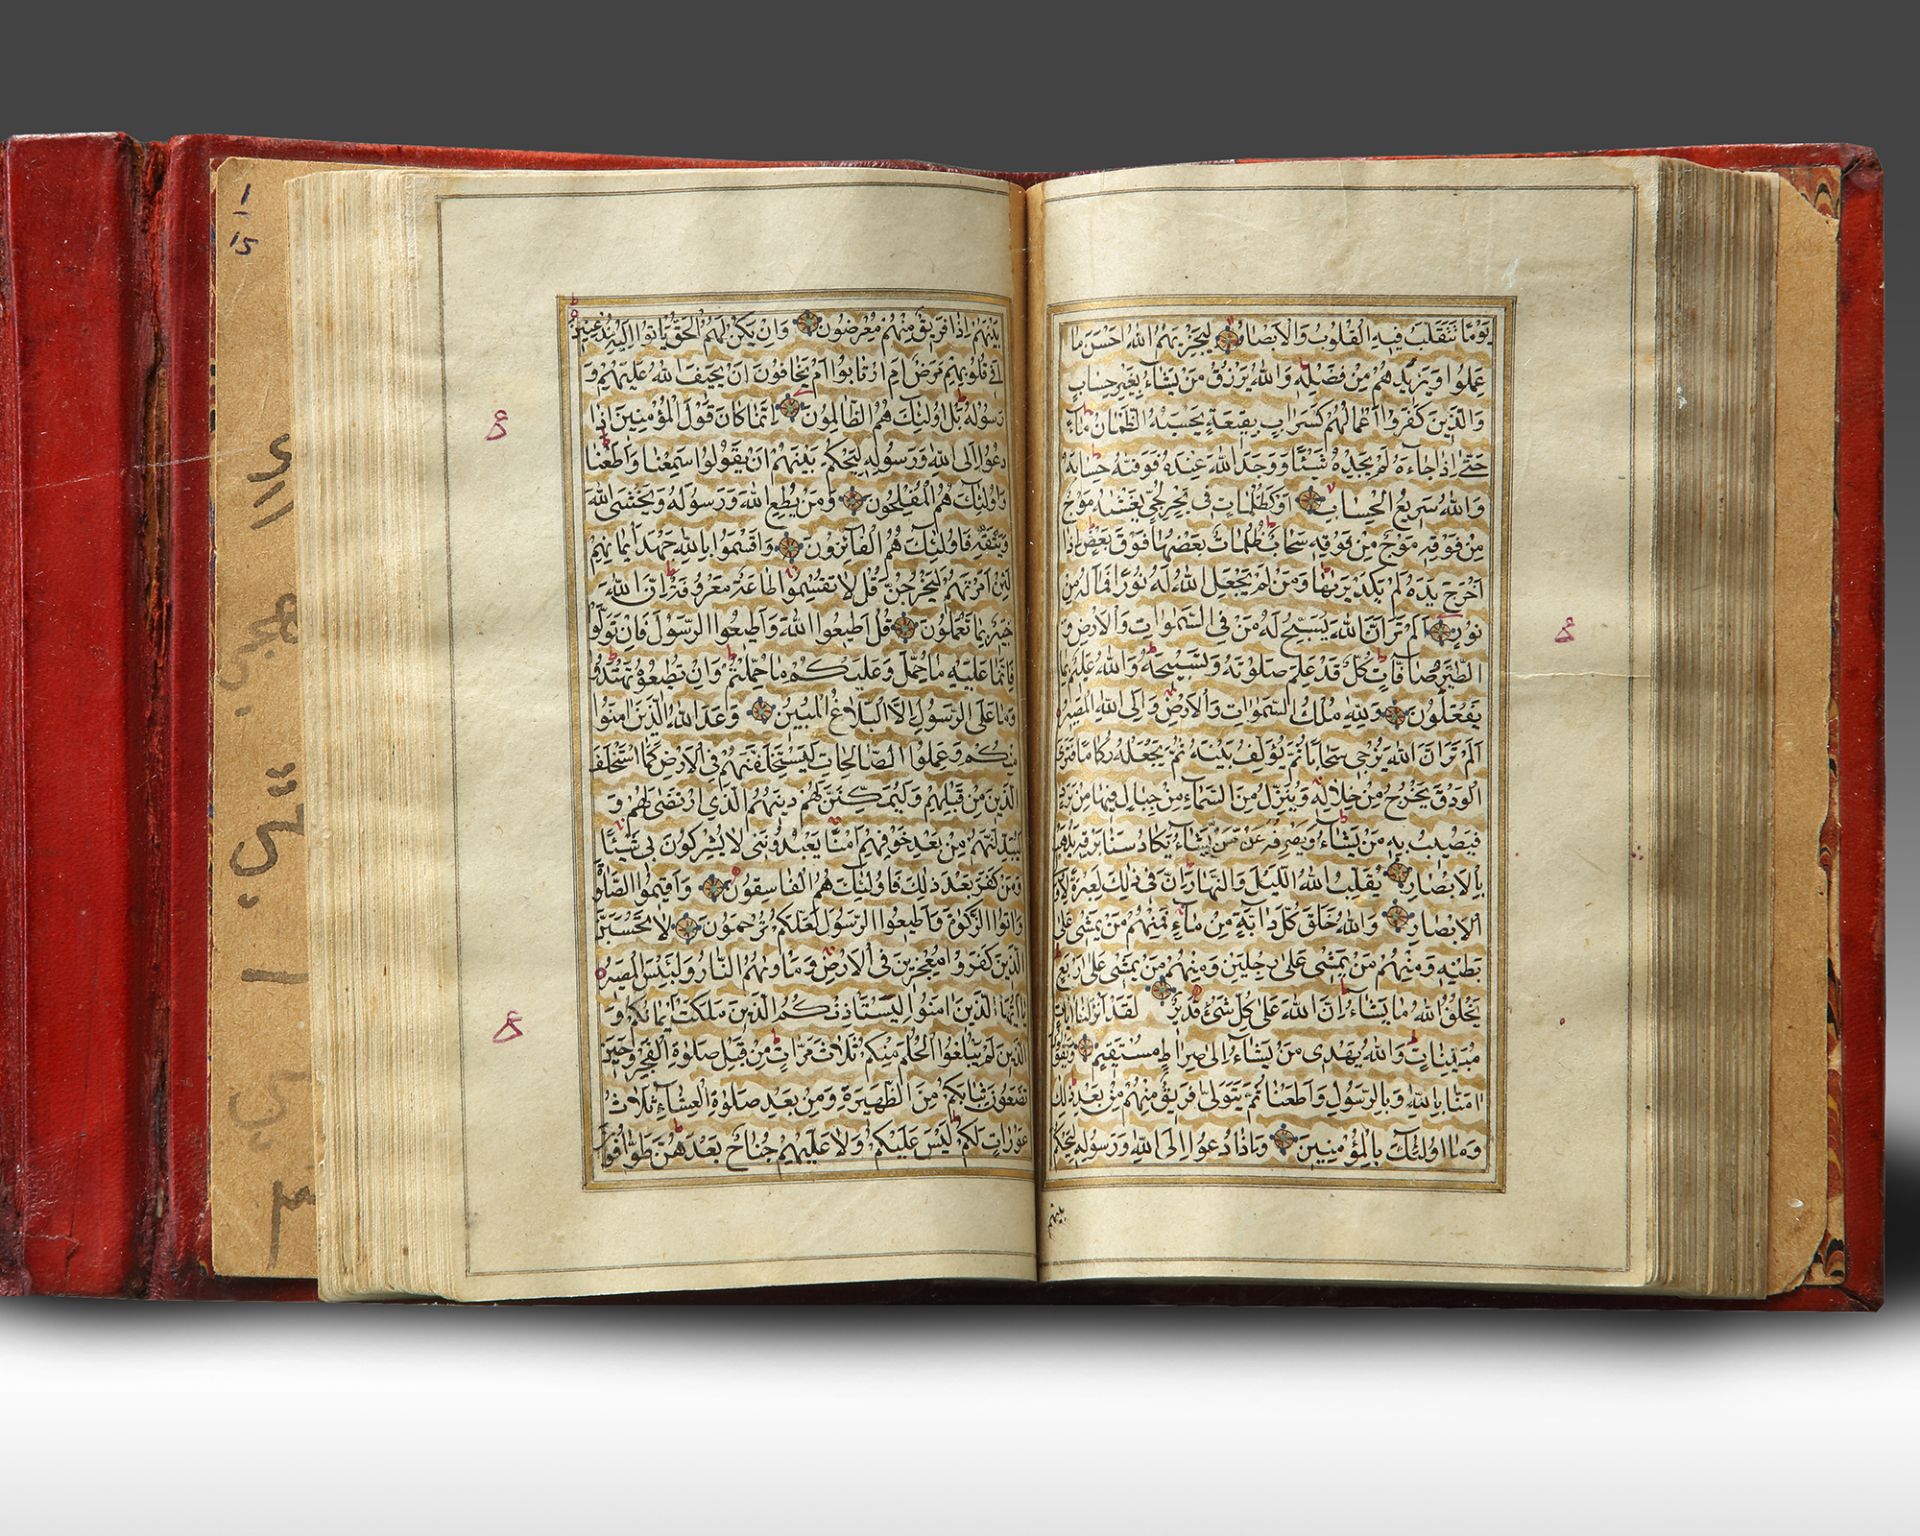 A SMALL RED LEATHER-BOUND QURAN - Image 4 of 4